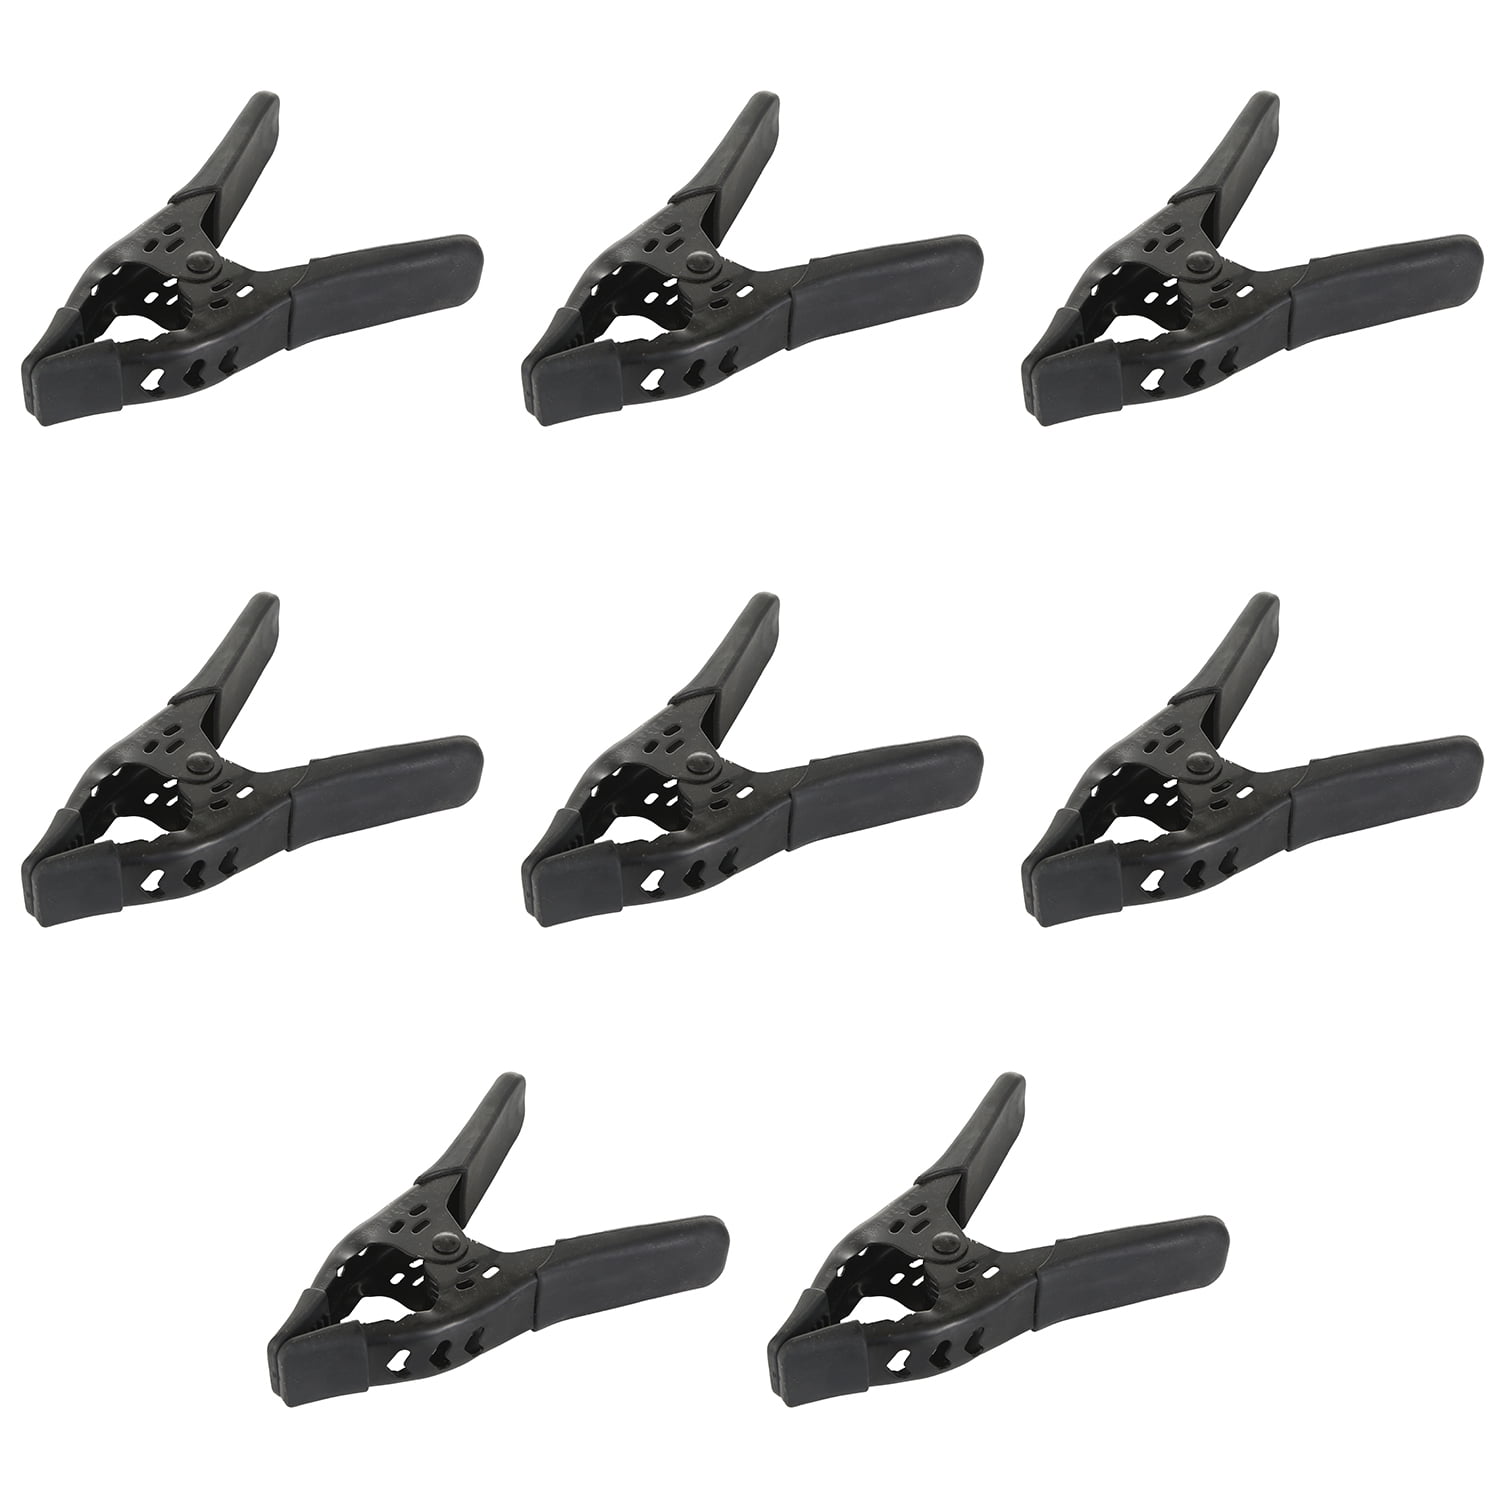 Online Best Service 12 Pack 6 inch Clamp Large Heavy Duty Spring Metal 3 inch Jaw opening